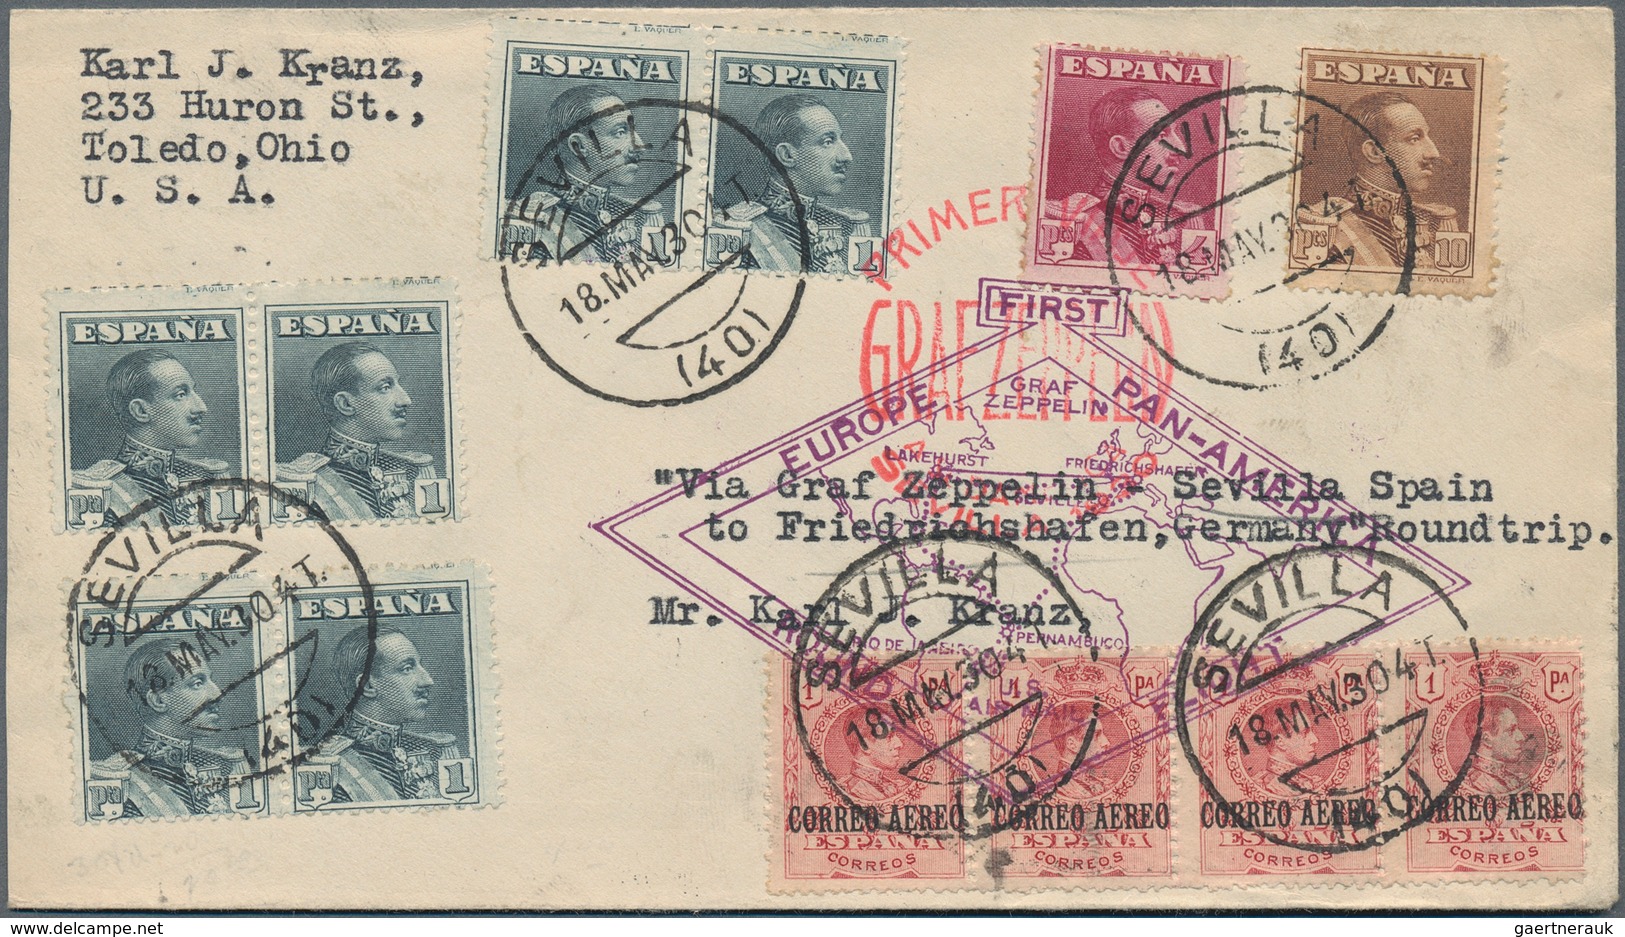 Zeppelinpost Europa: Collection of over 110 Zeppelin items, mostly flown covers with a large number